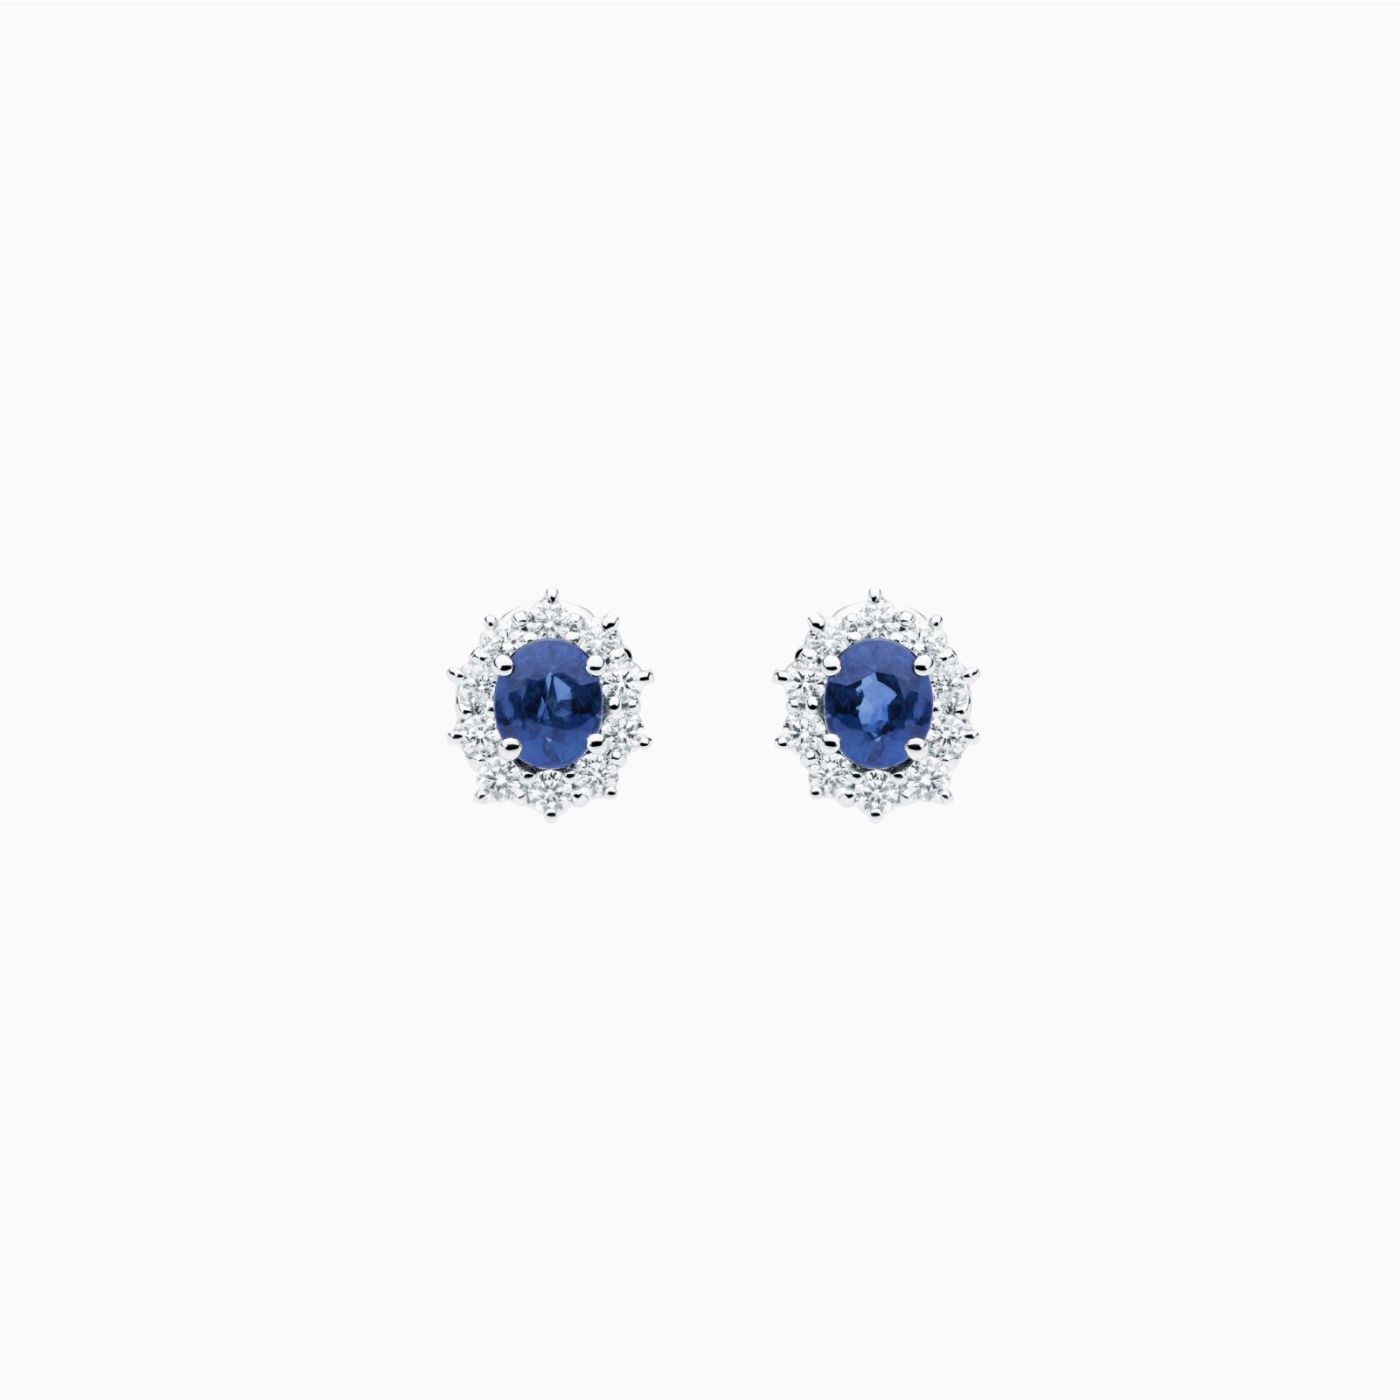 White gold earrings with blue sapphire and diamonds